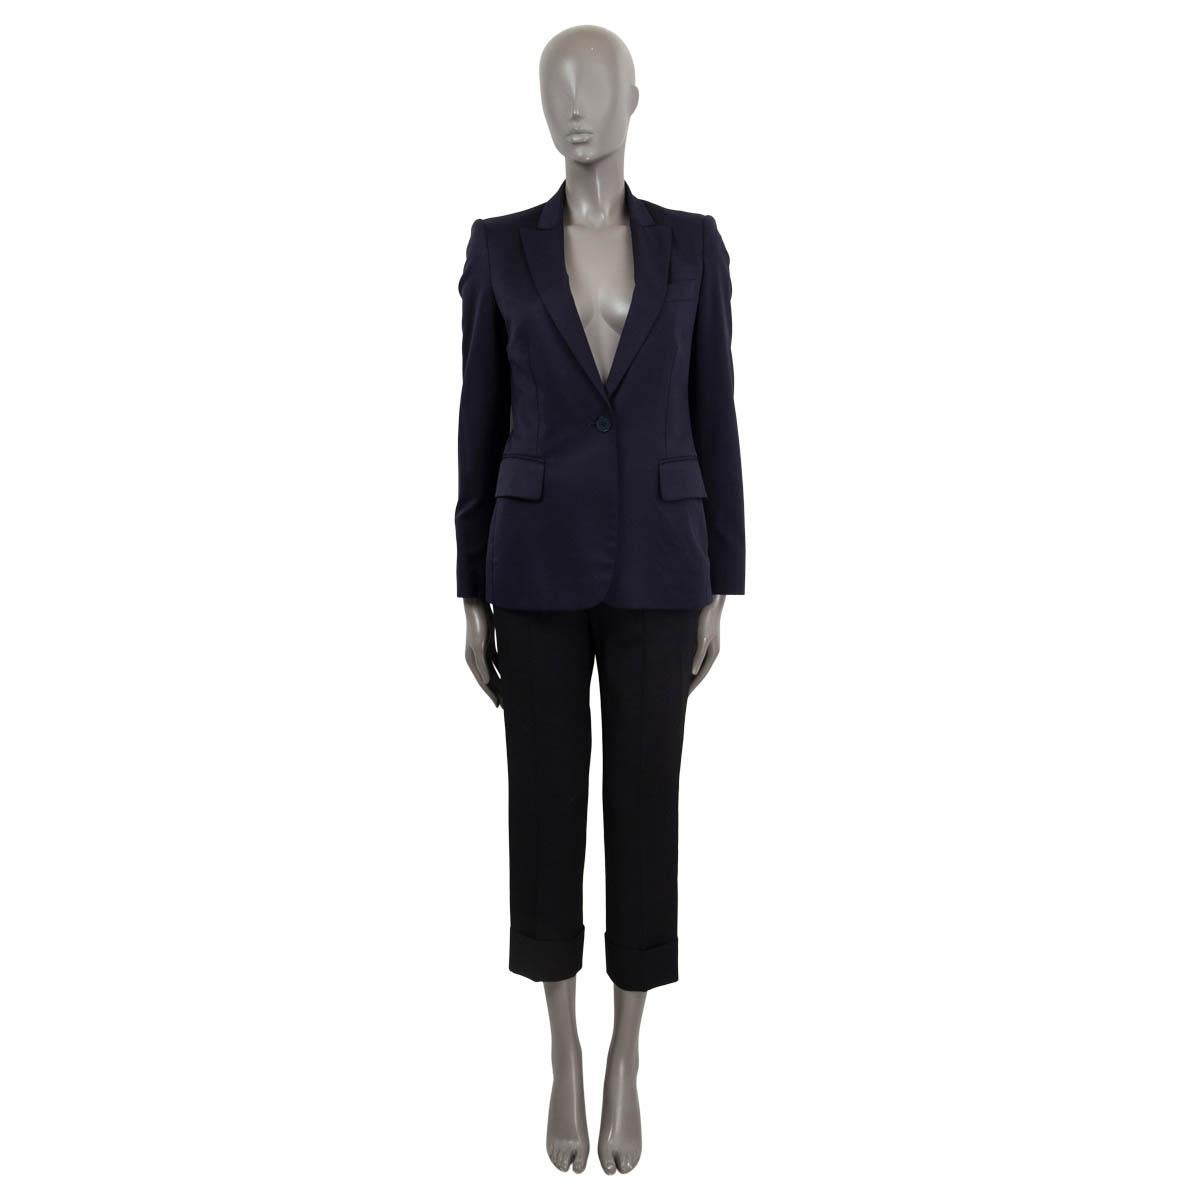 100% authentic Stella McCartney peak collar single button blazer in navy wool (100%), (rayon52%) and cotton (48%). Features buttoned cuffs, two flap pockets on the front and one chest pocket. Lined in blue rayon (100%). Has been worn and is in